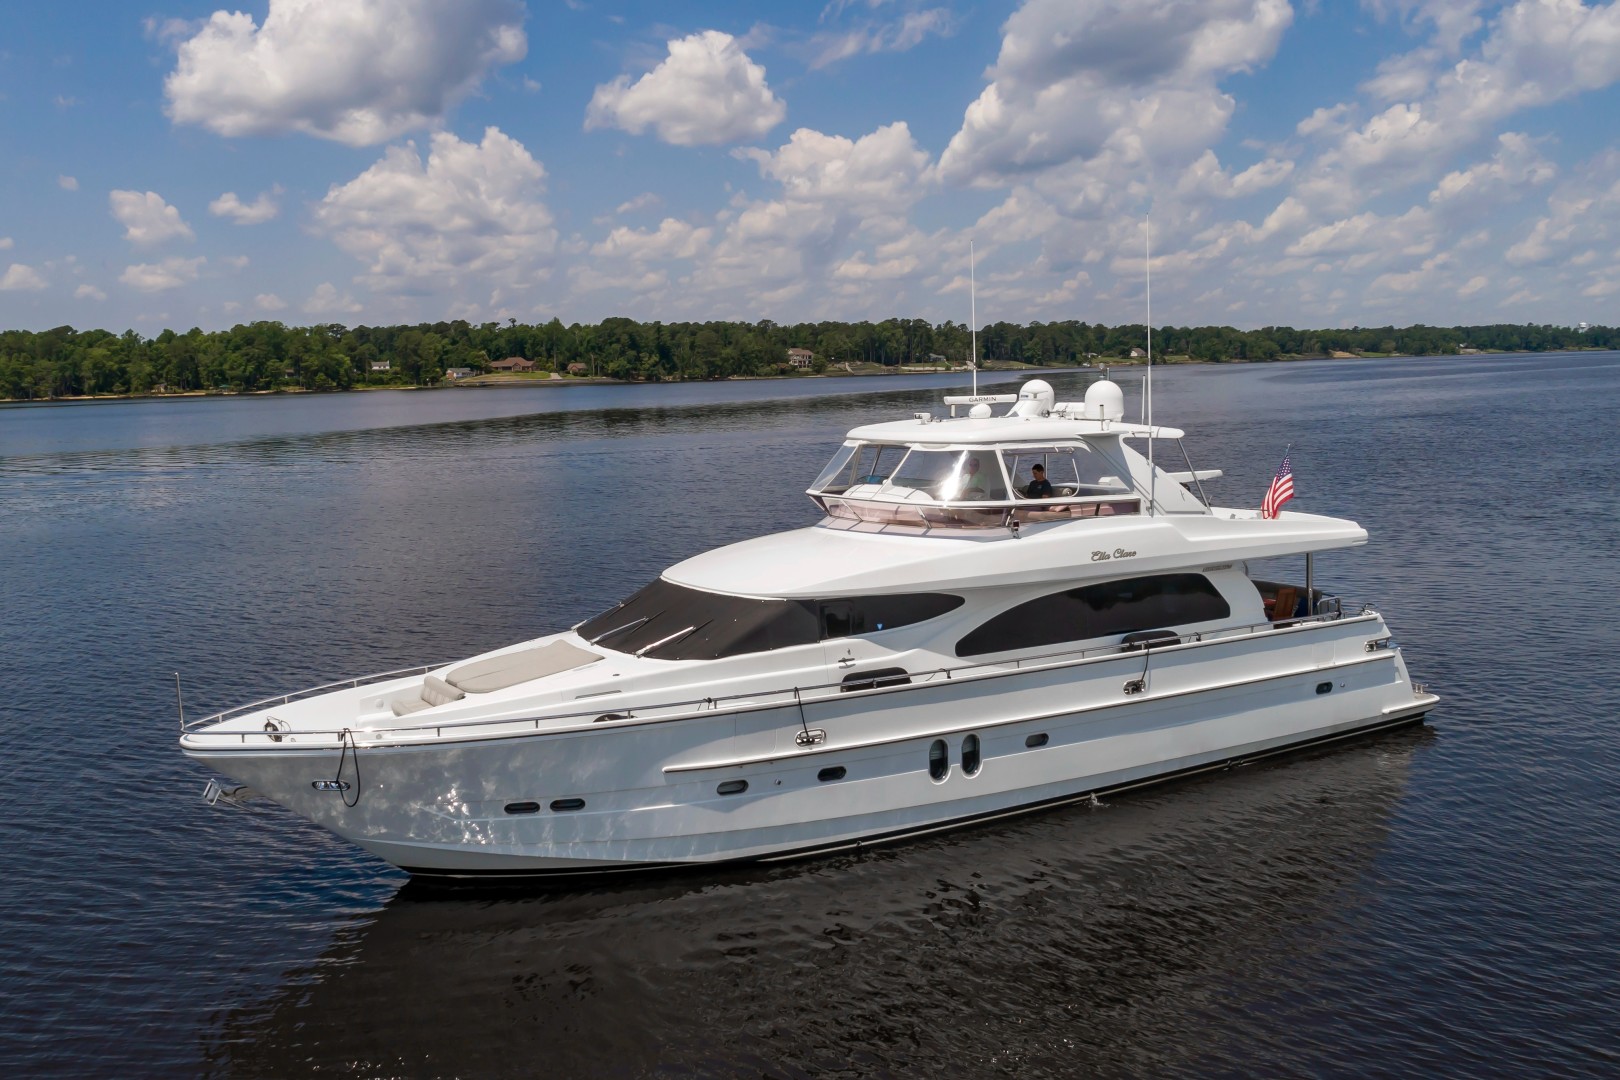 Picture of motor yacht Ella Claire, a 76 foot Horizon